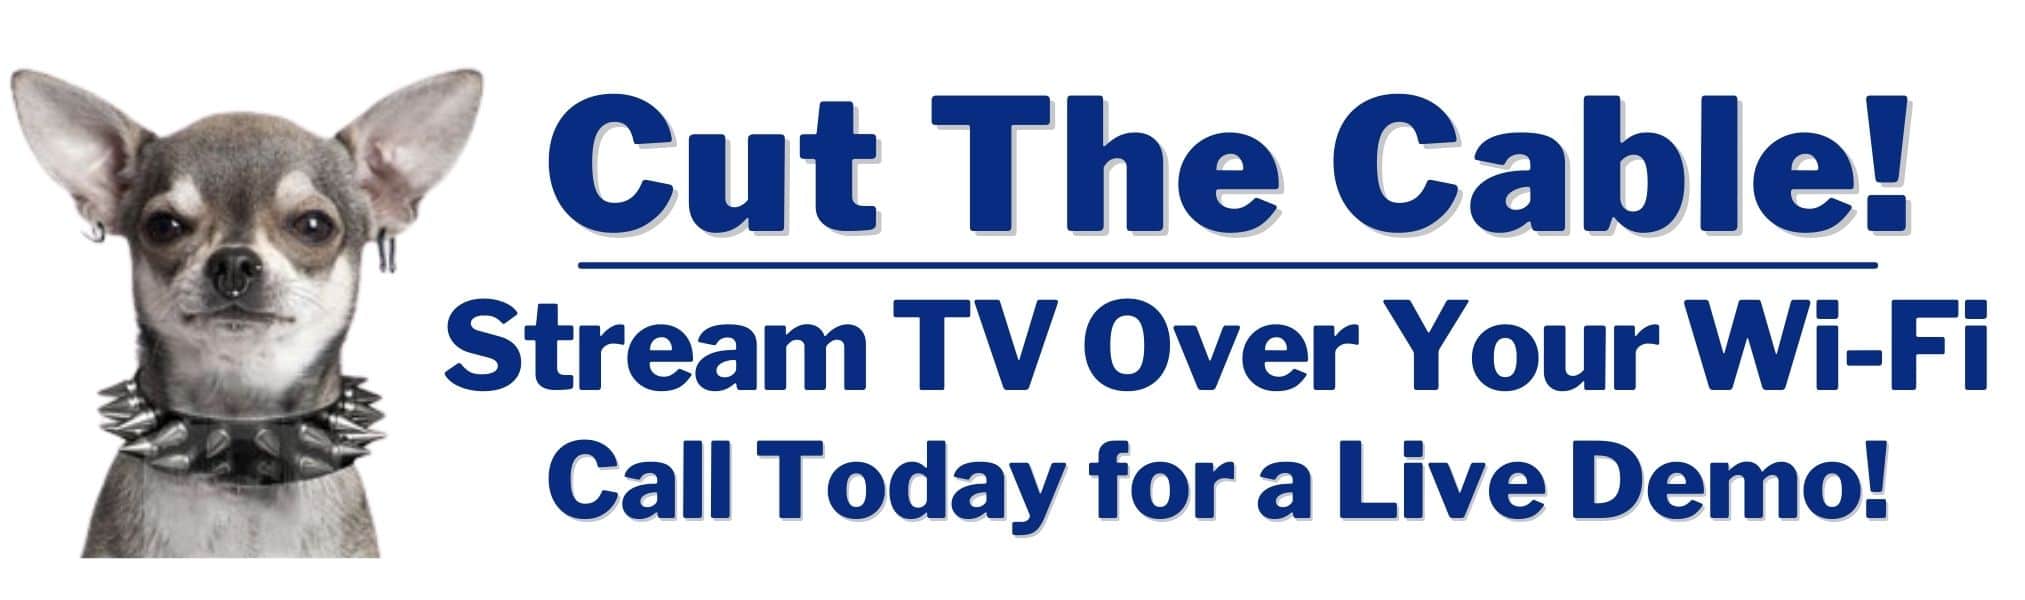 Our Services - Cut the Cable - Stream TV over Your Wi-Fi